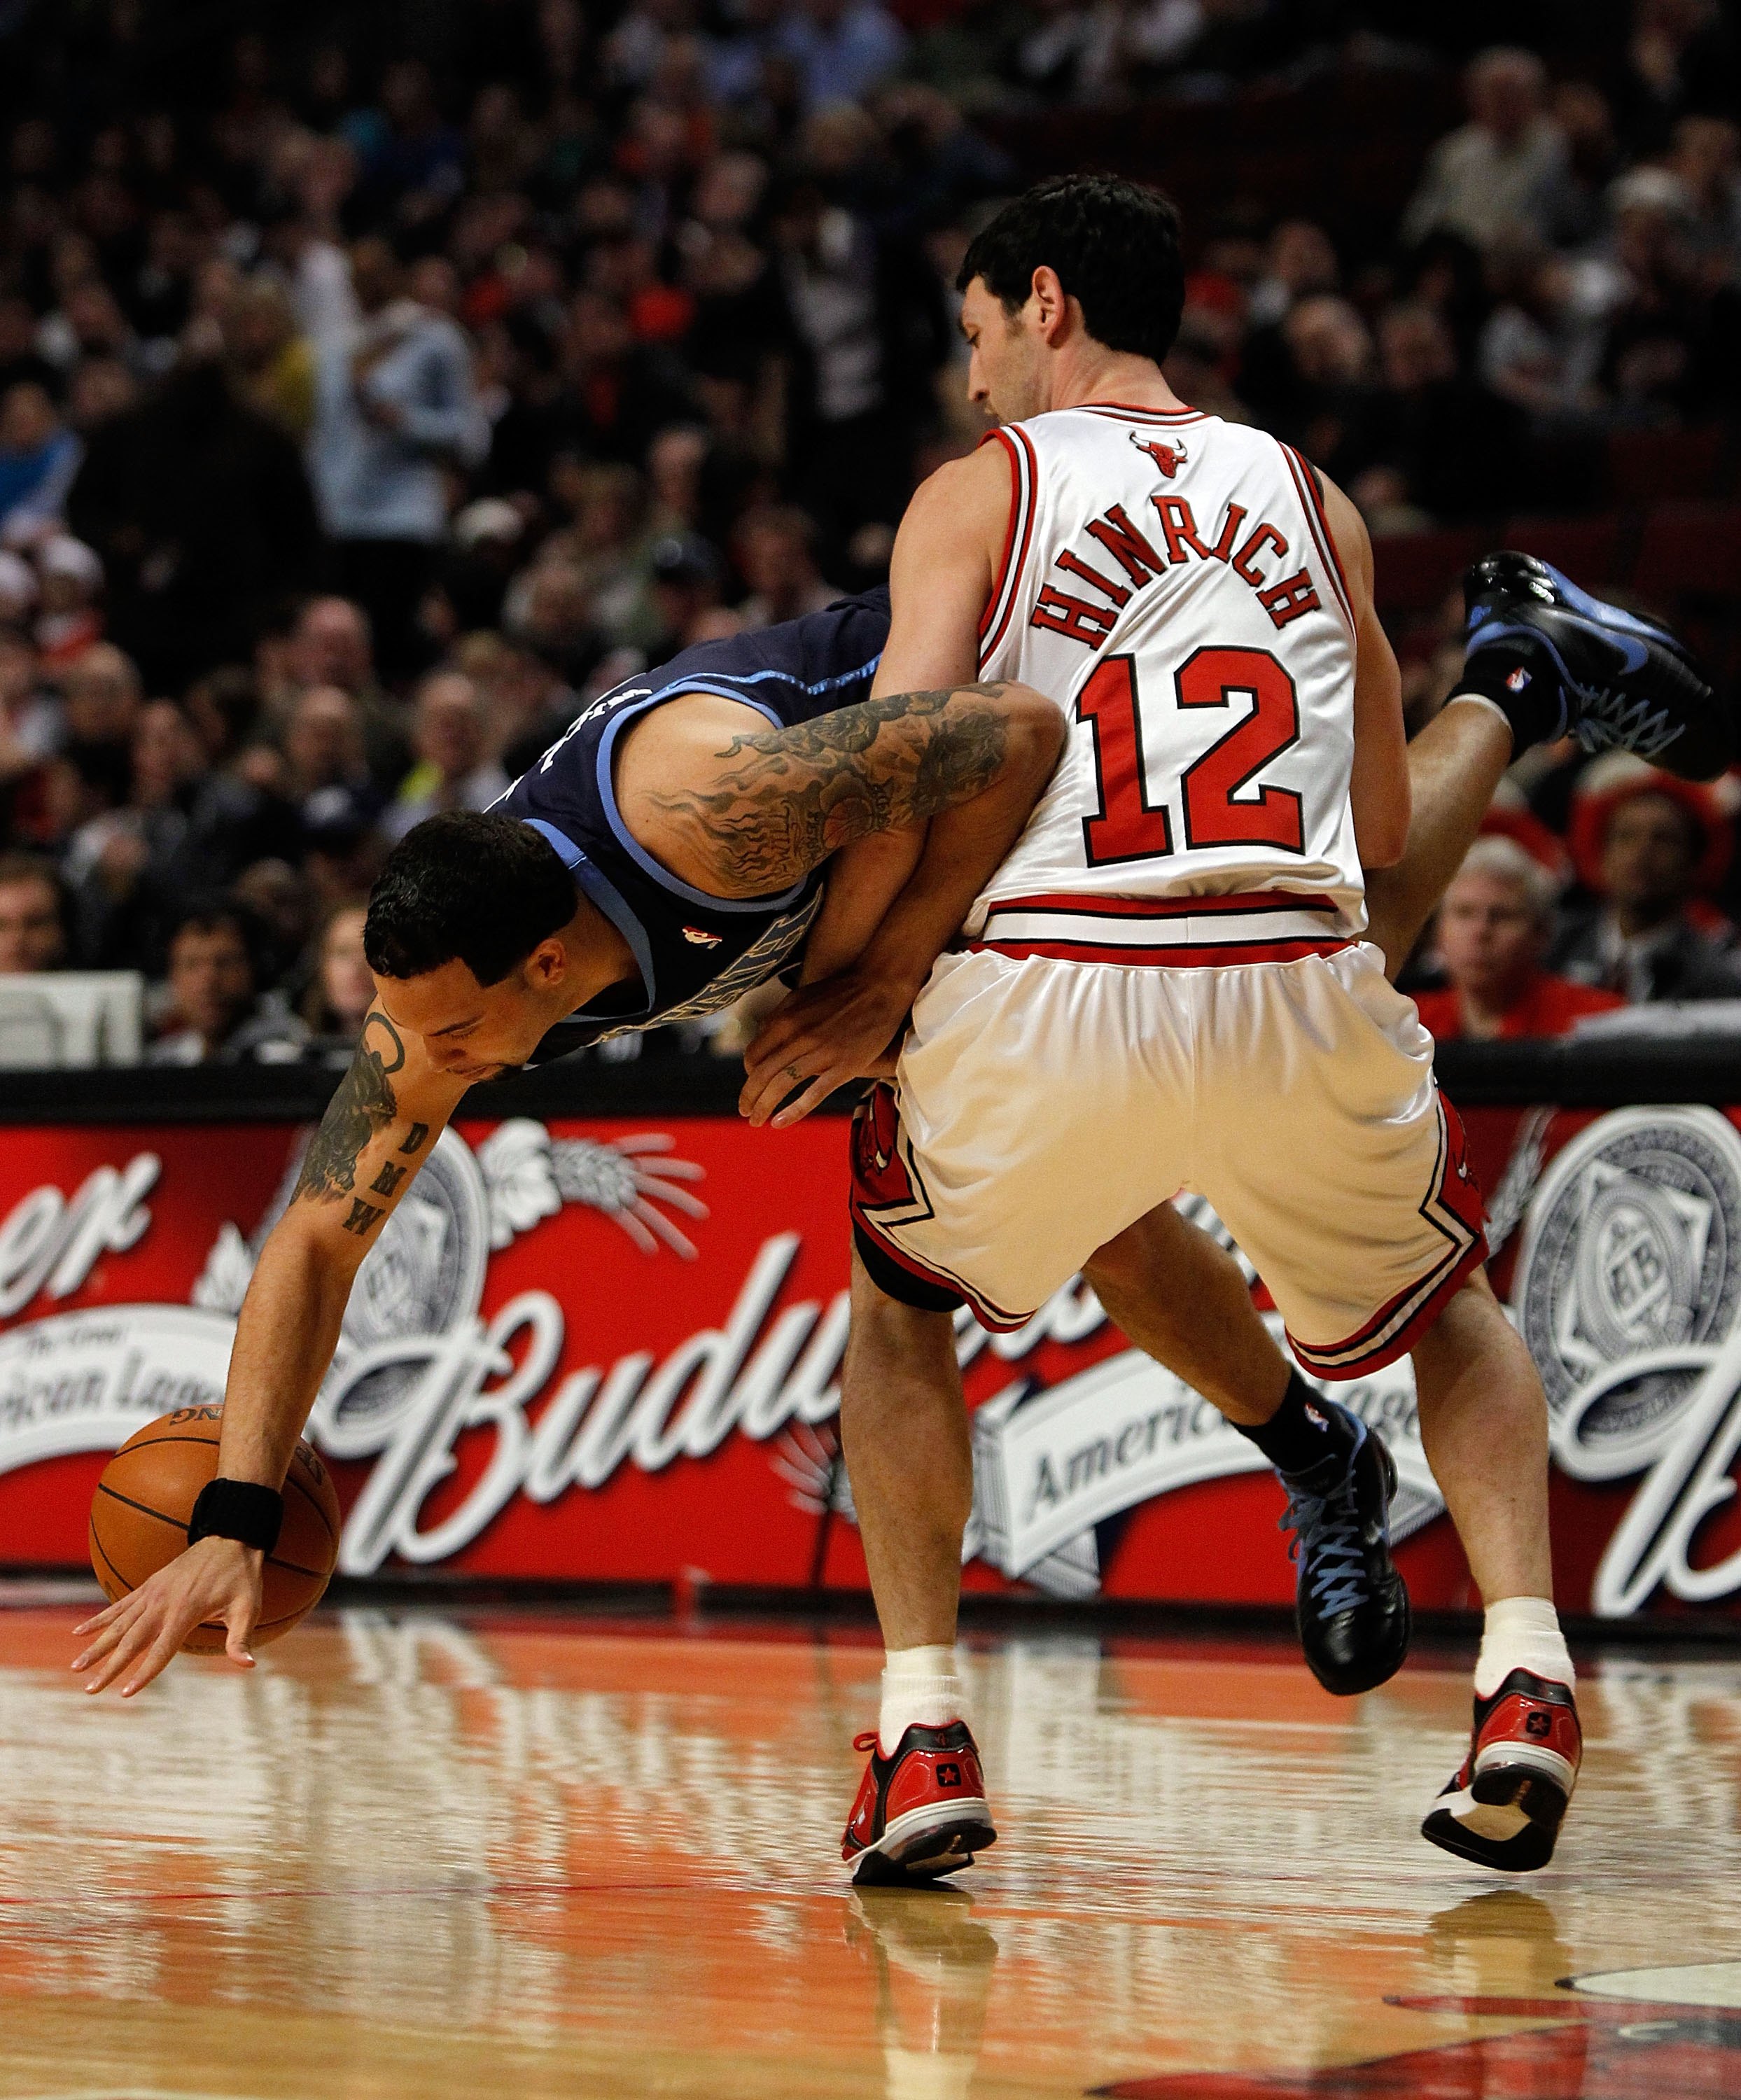 CHICAGO - MARCH 09: Deron Williams #8 of the Utah Jazz flips in the air and looses the ball as he is fouled by Kirk Hinrich #12 of the Chicago Bulls at the United Center on March 9, 2010 in Chicago, Illinois. The Jazz defeated the Bulls 132-108. NOTE TO U